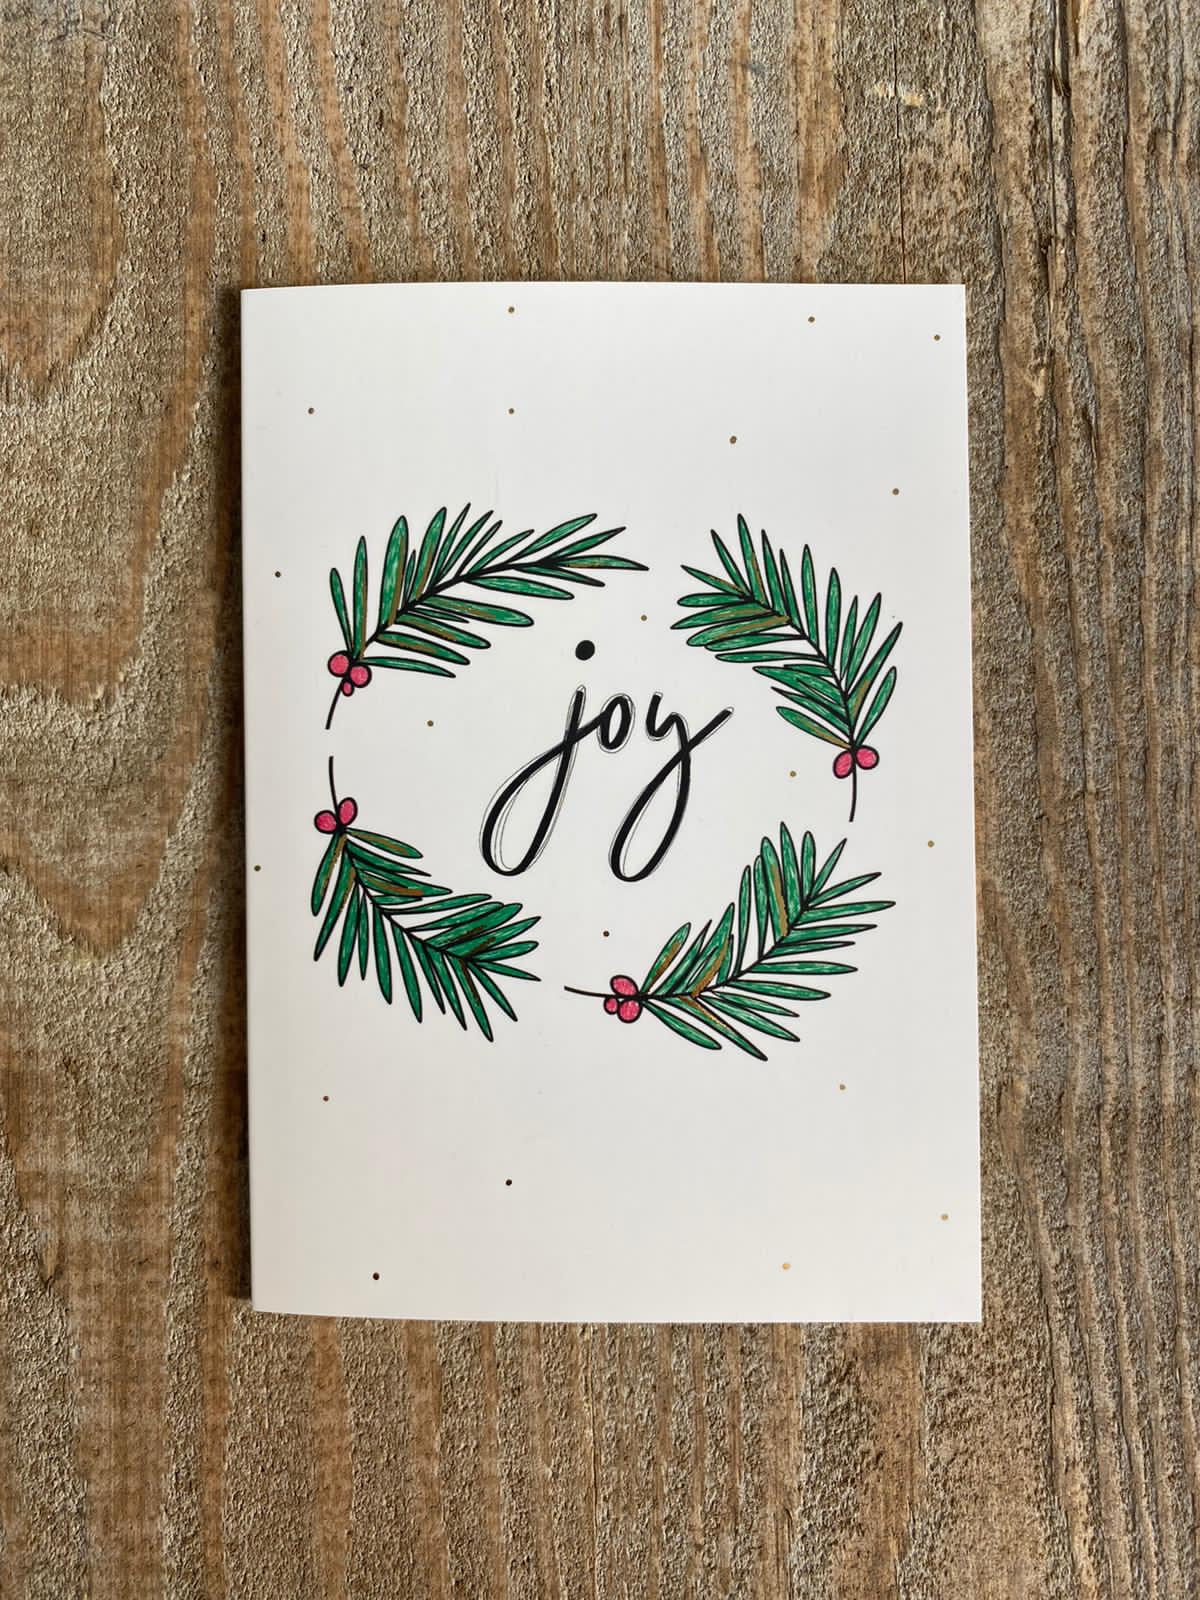 *Sands Christmas ‘Joy’ Card designed by our own Stormiehud